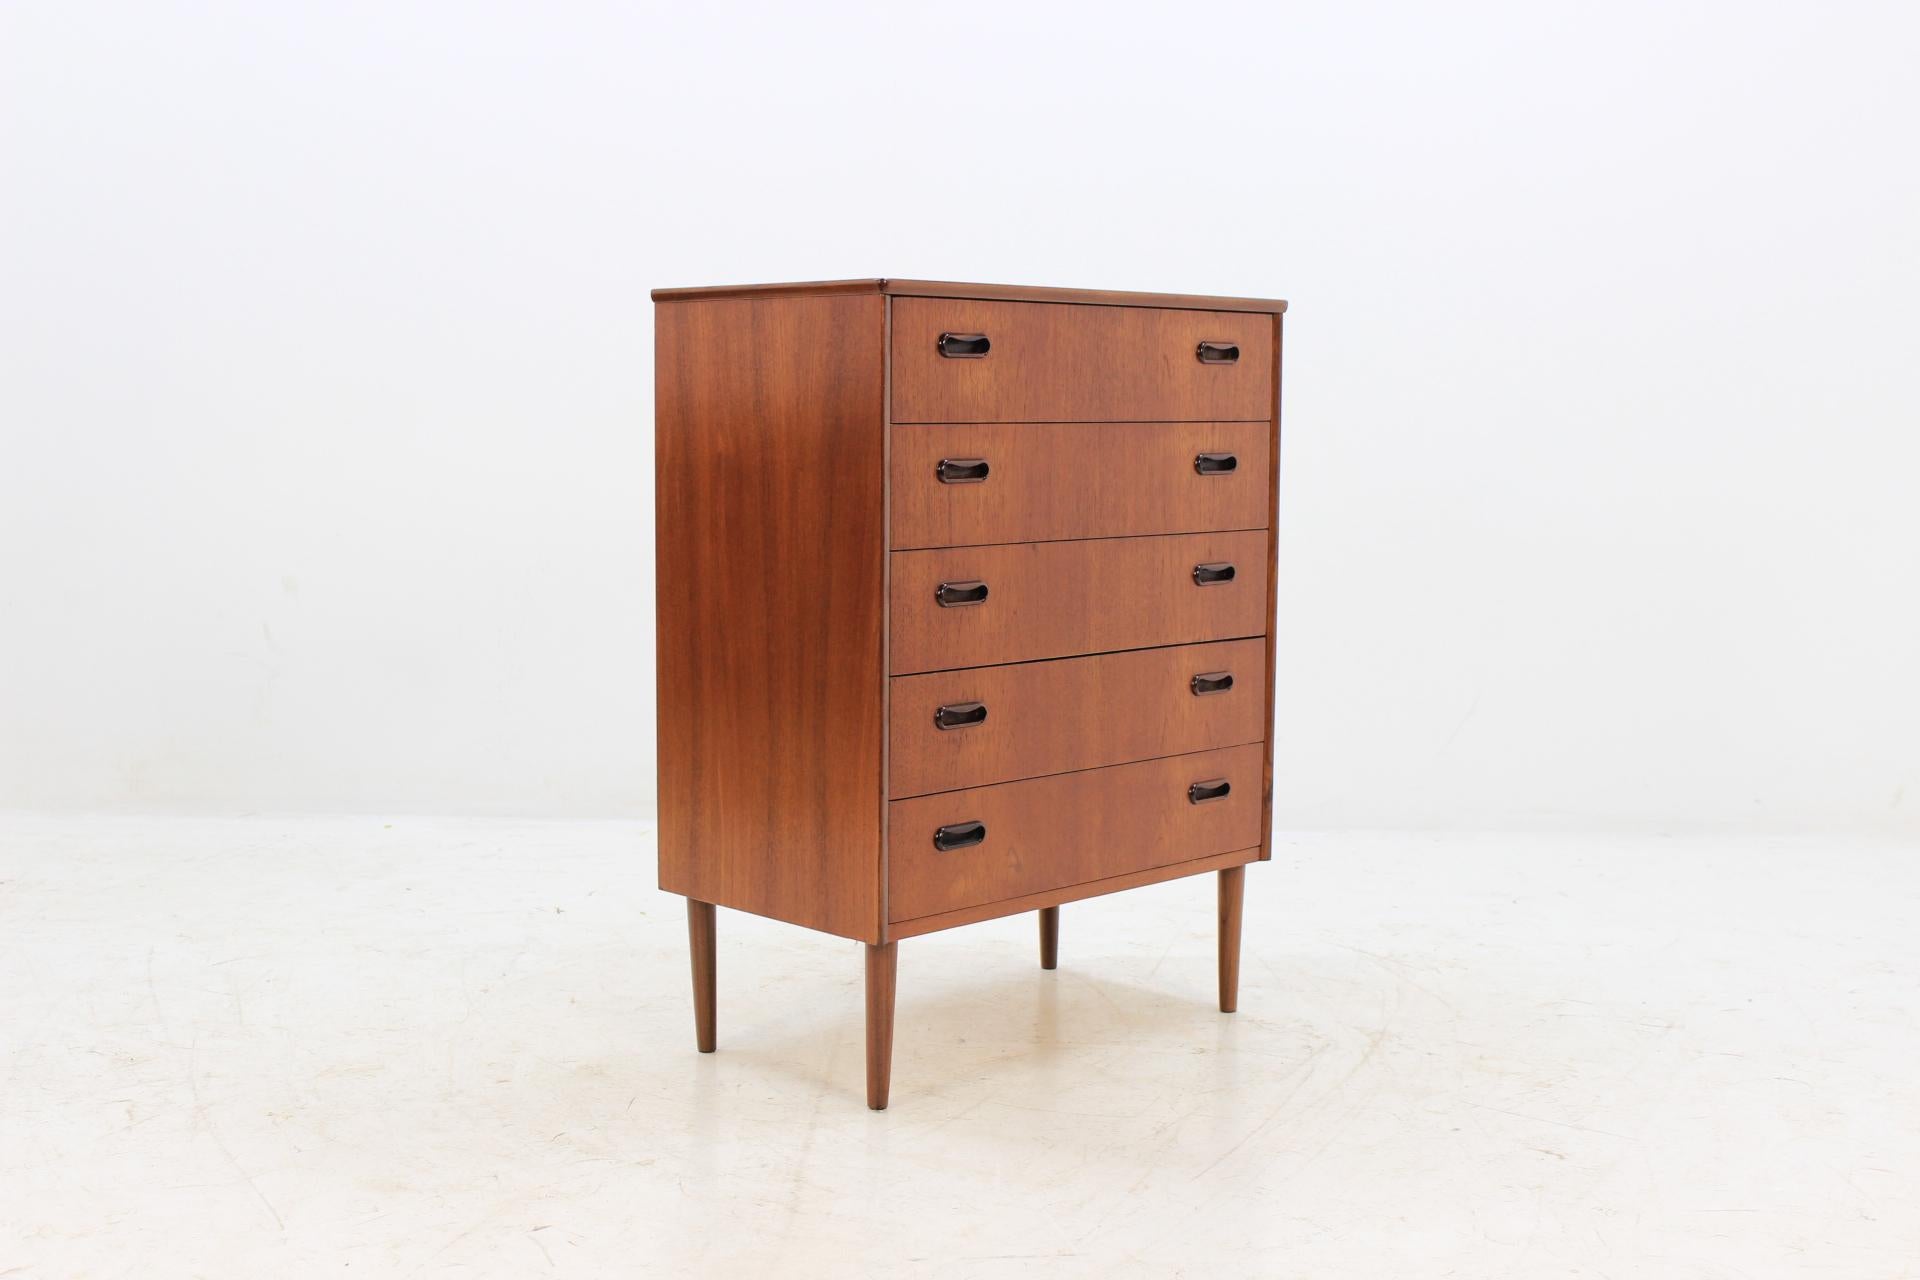 This commode features five drawers. The item was refurbished.